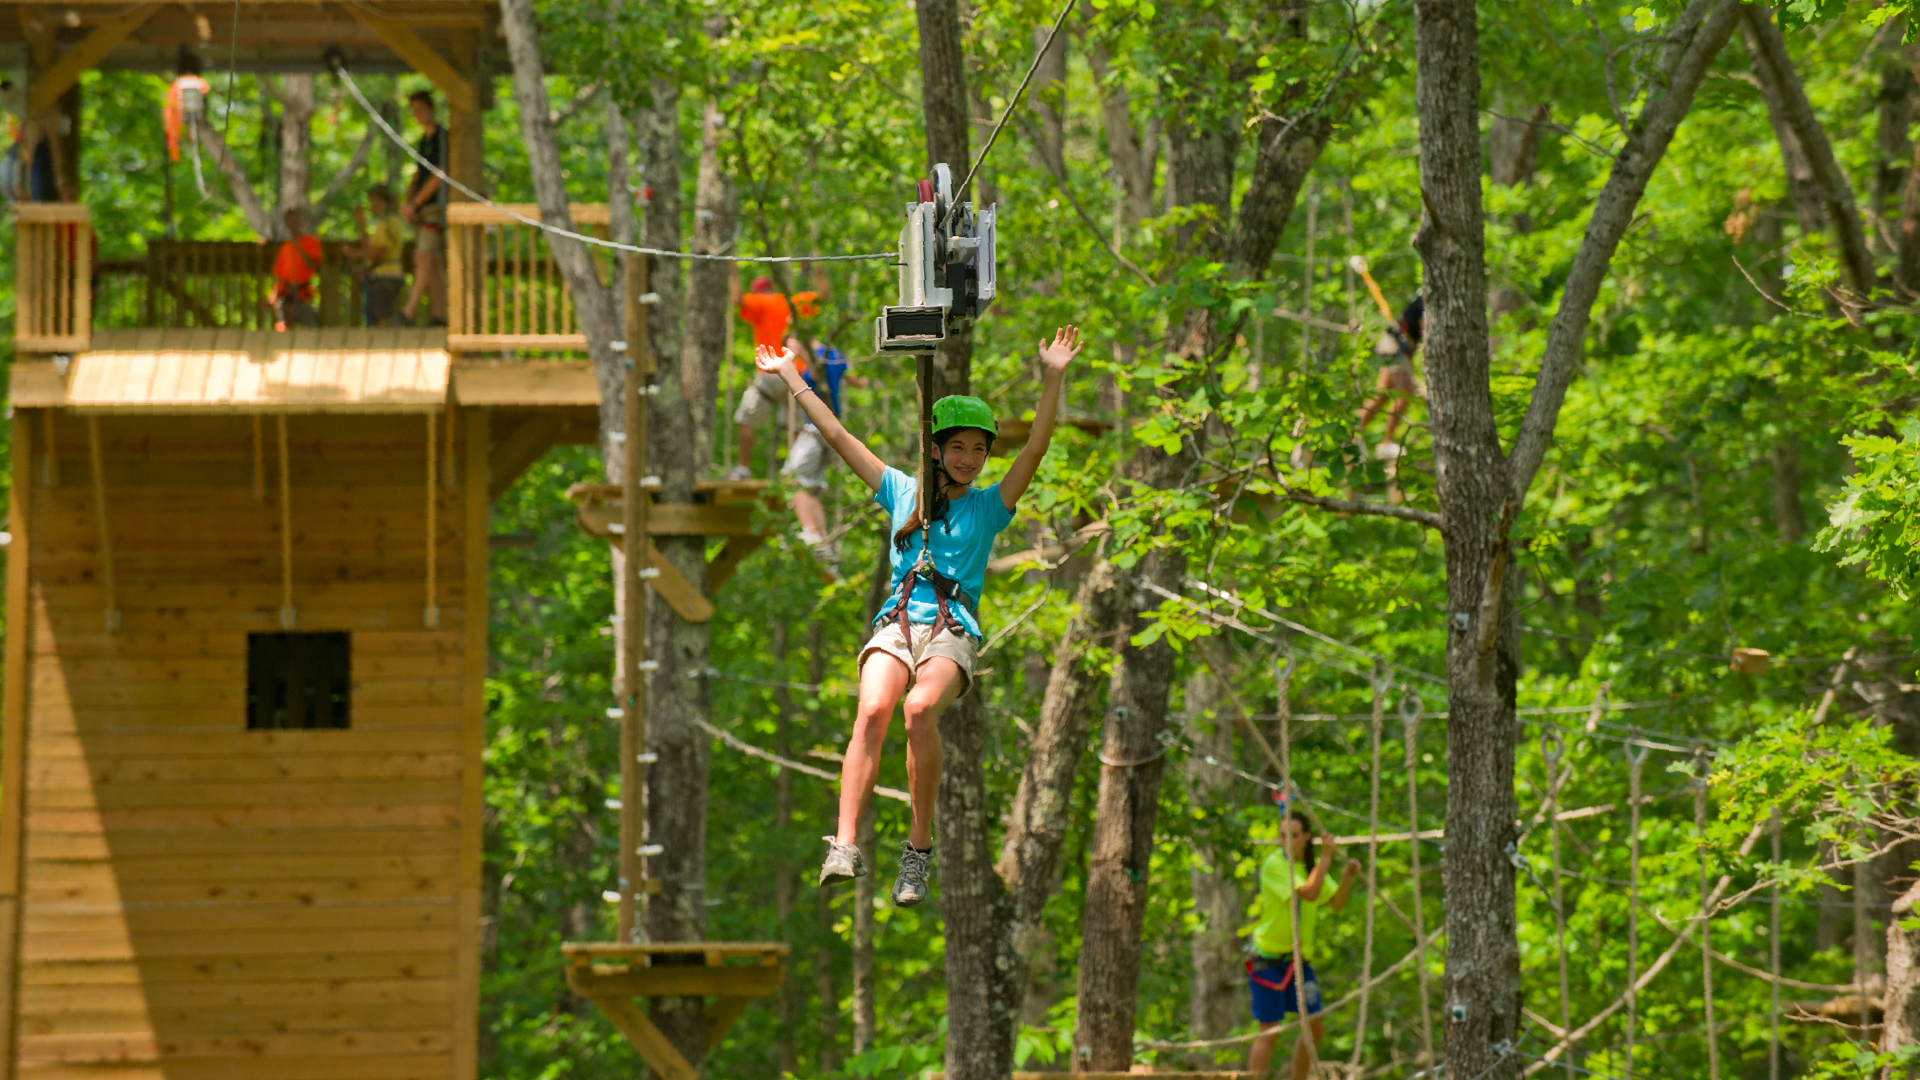 Person ziplining in a forest.